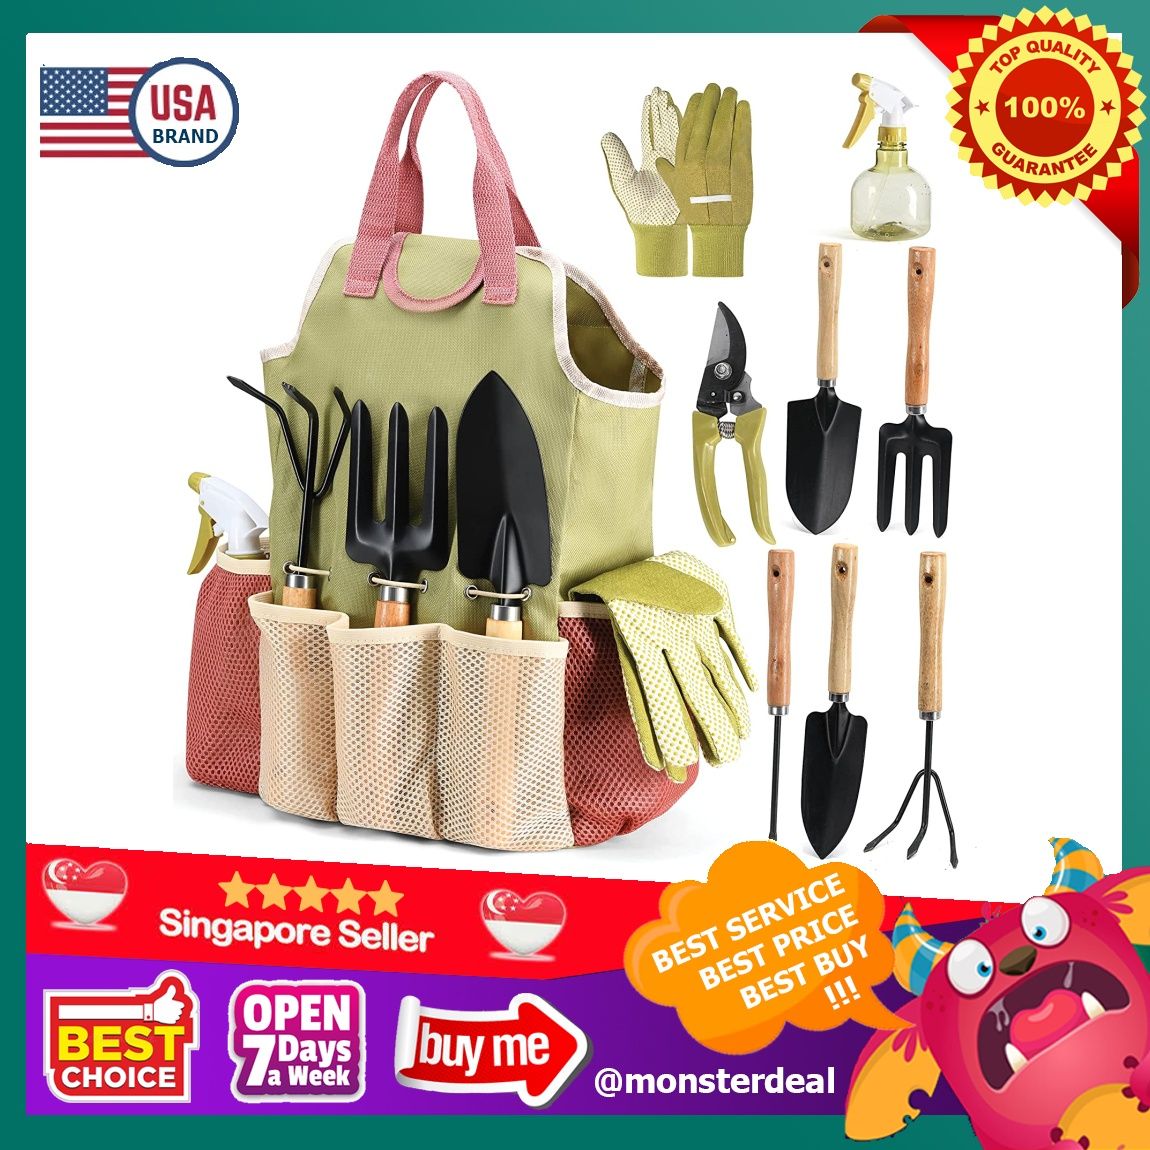 Gardening Tools Set of 10 - Complete Garden Tool Kit Comes With